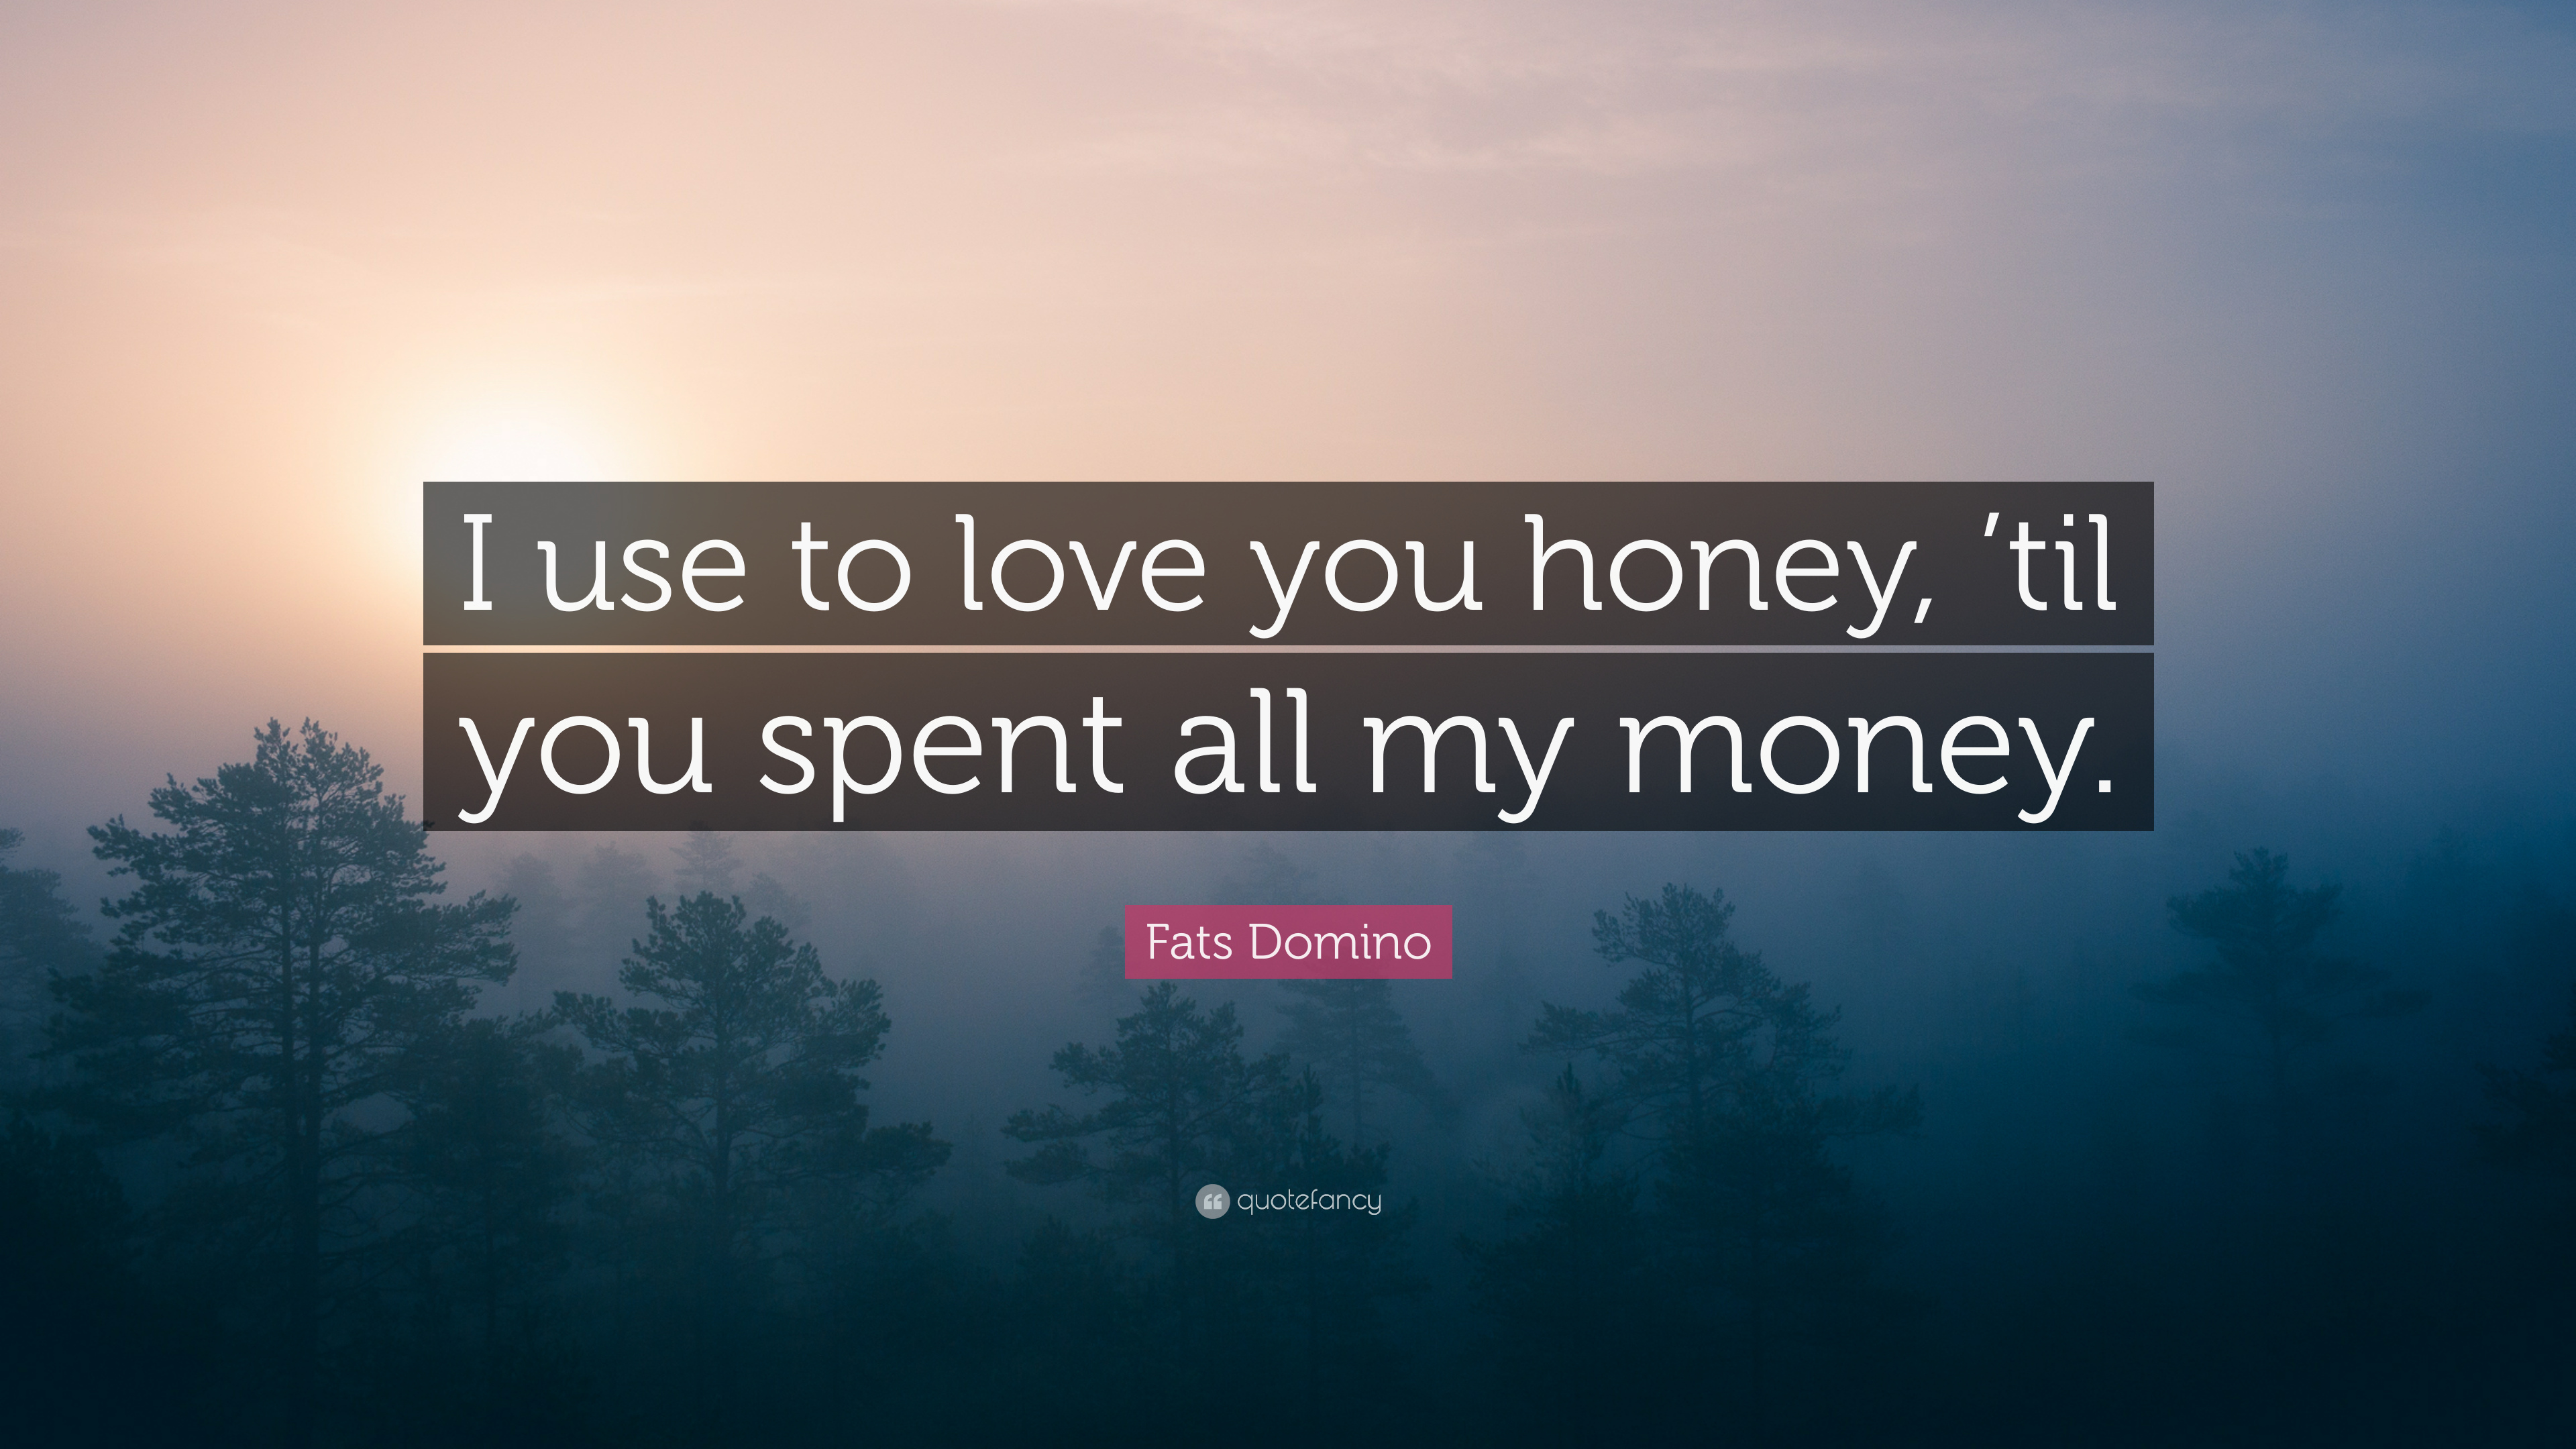 7 Fats Domino Quotes About Love